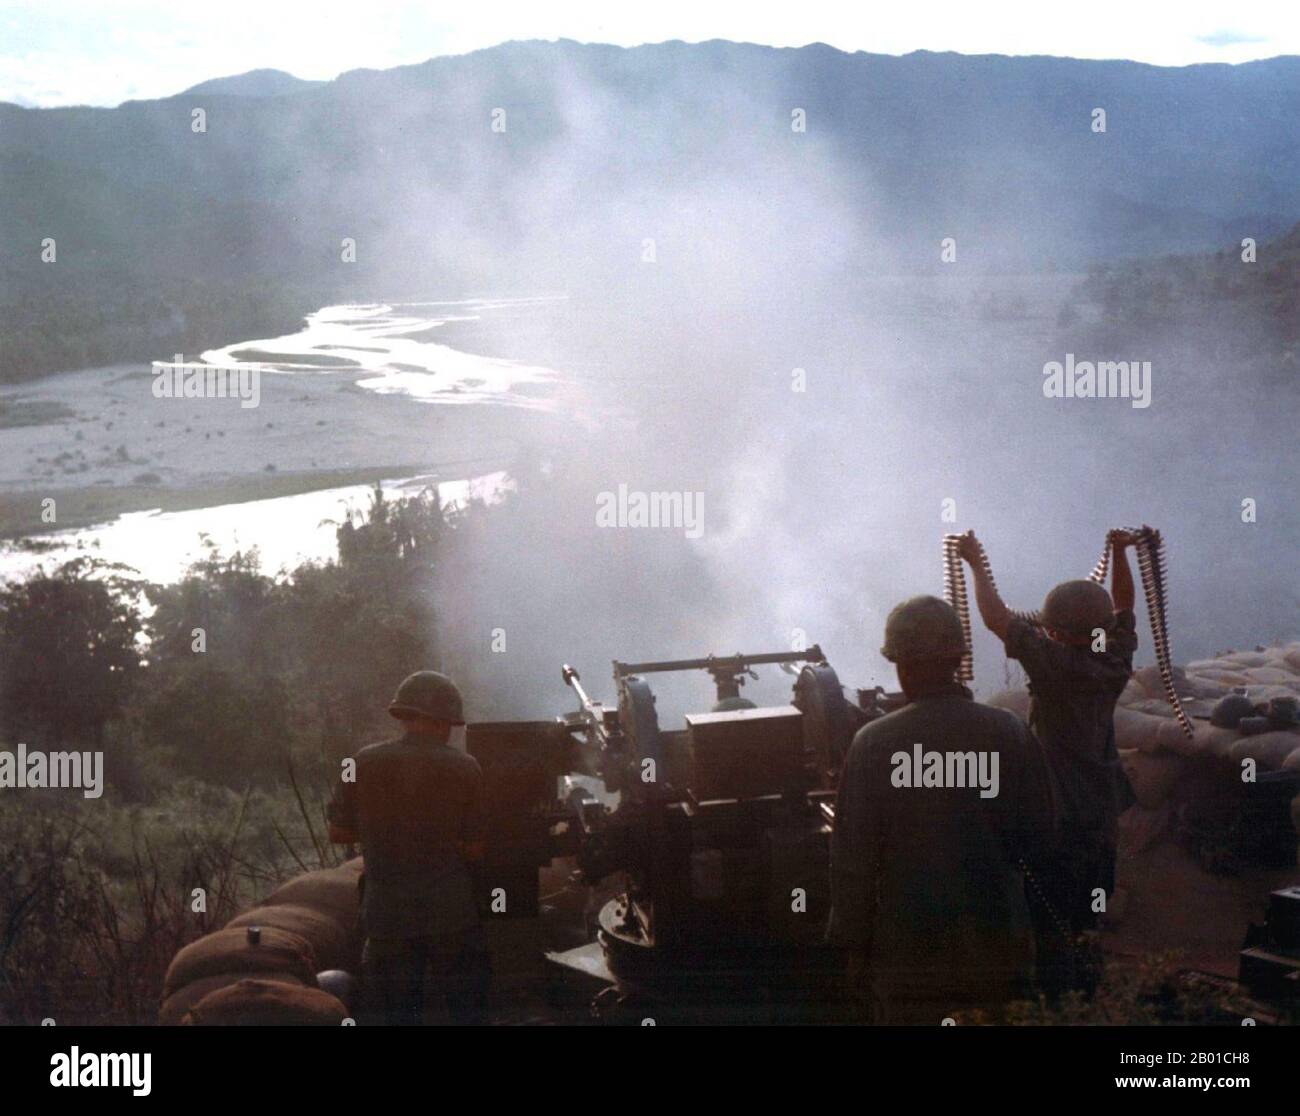 Vietnam: Troops from the US 7th Cavalry Regiment firing a quad 50 machine gun during Operation Pershing in Binh Dinh Province, 1967.  The Second Indochina War, known in America as the Vietnam War, was a Cold War era military conflict that occurred in Vietnam, Laos, and Cambodia from 1 November 1955 to the fall of Saigon on 30 April 1975. This war followed the First Indochina War and was fought between North Vietnam, supported by its communist allies, and the government of South Vietnam, supported by the U.S. and other anti-communist nations. Stock Photo